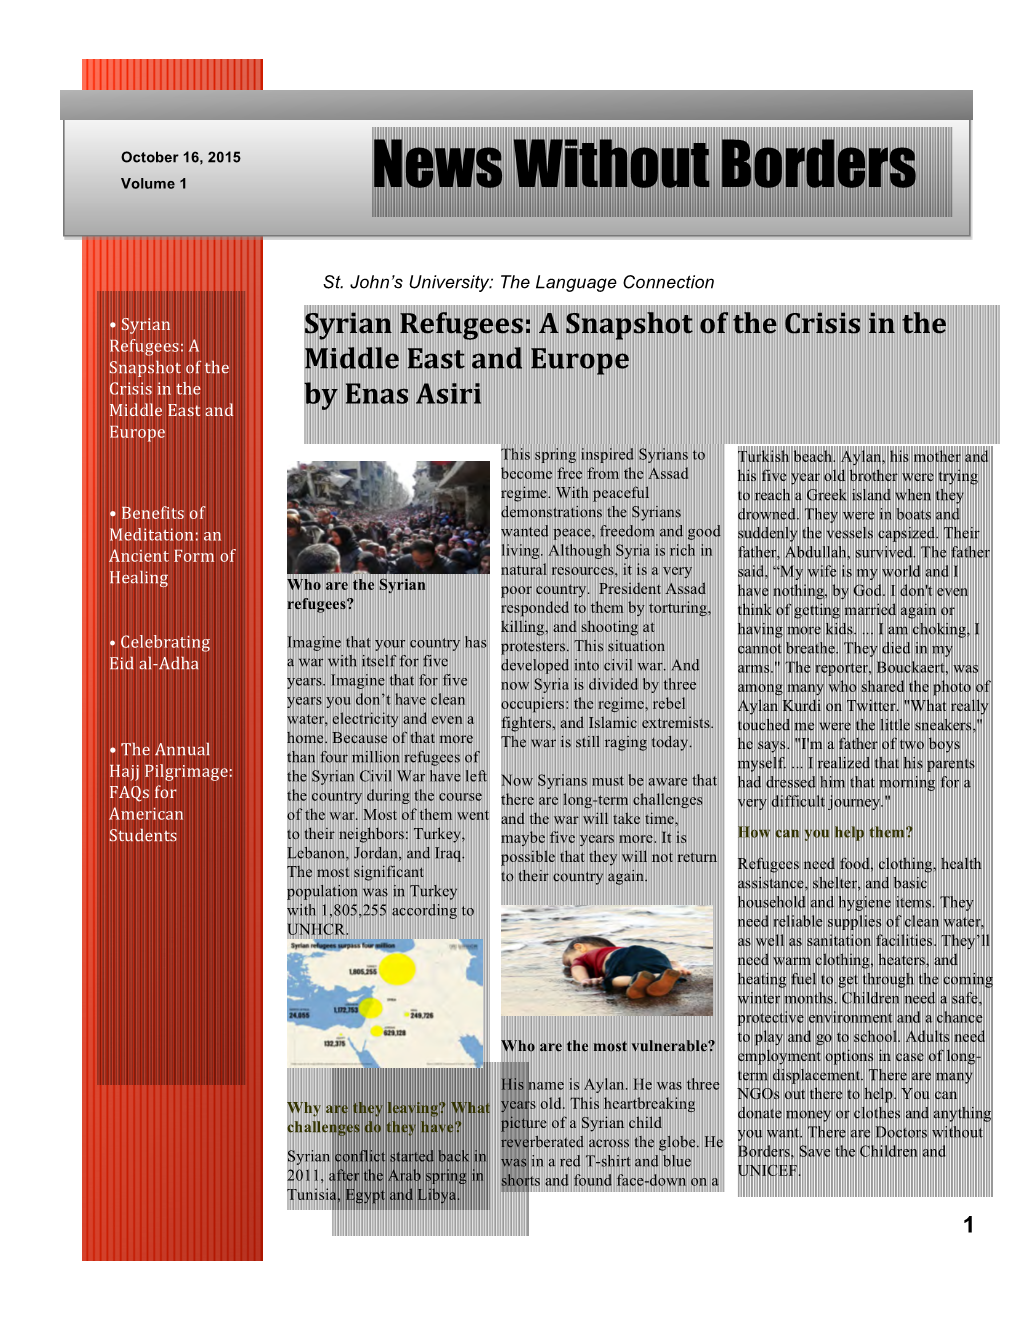 News Without Borders